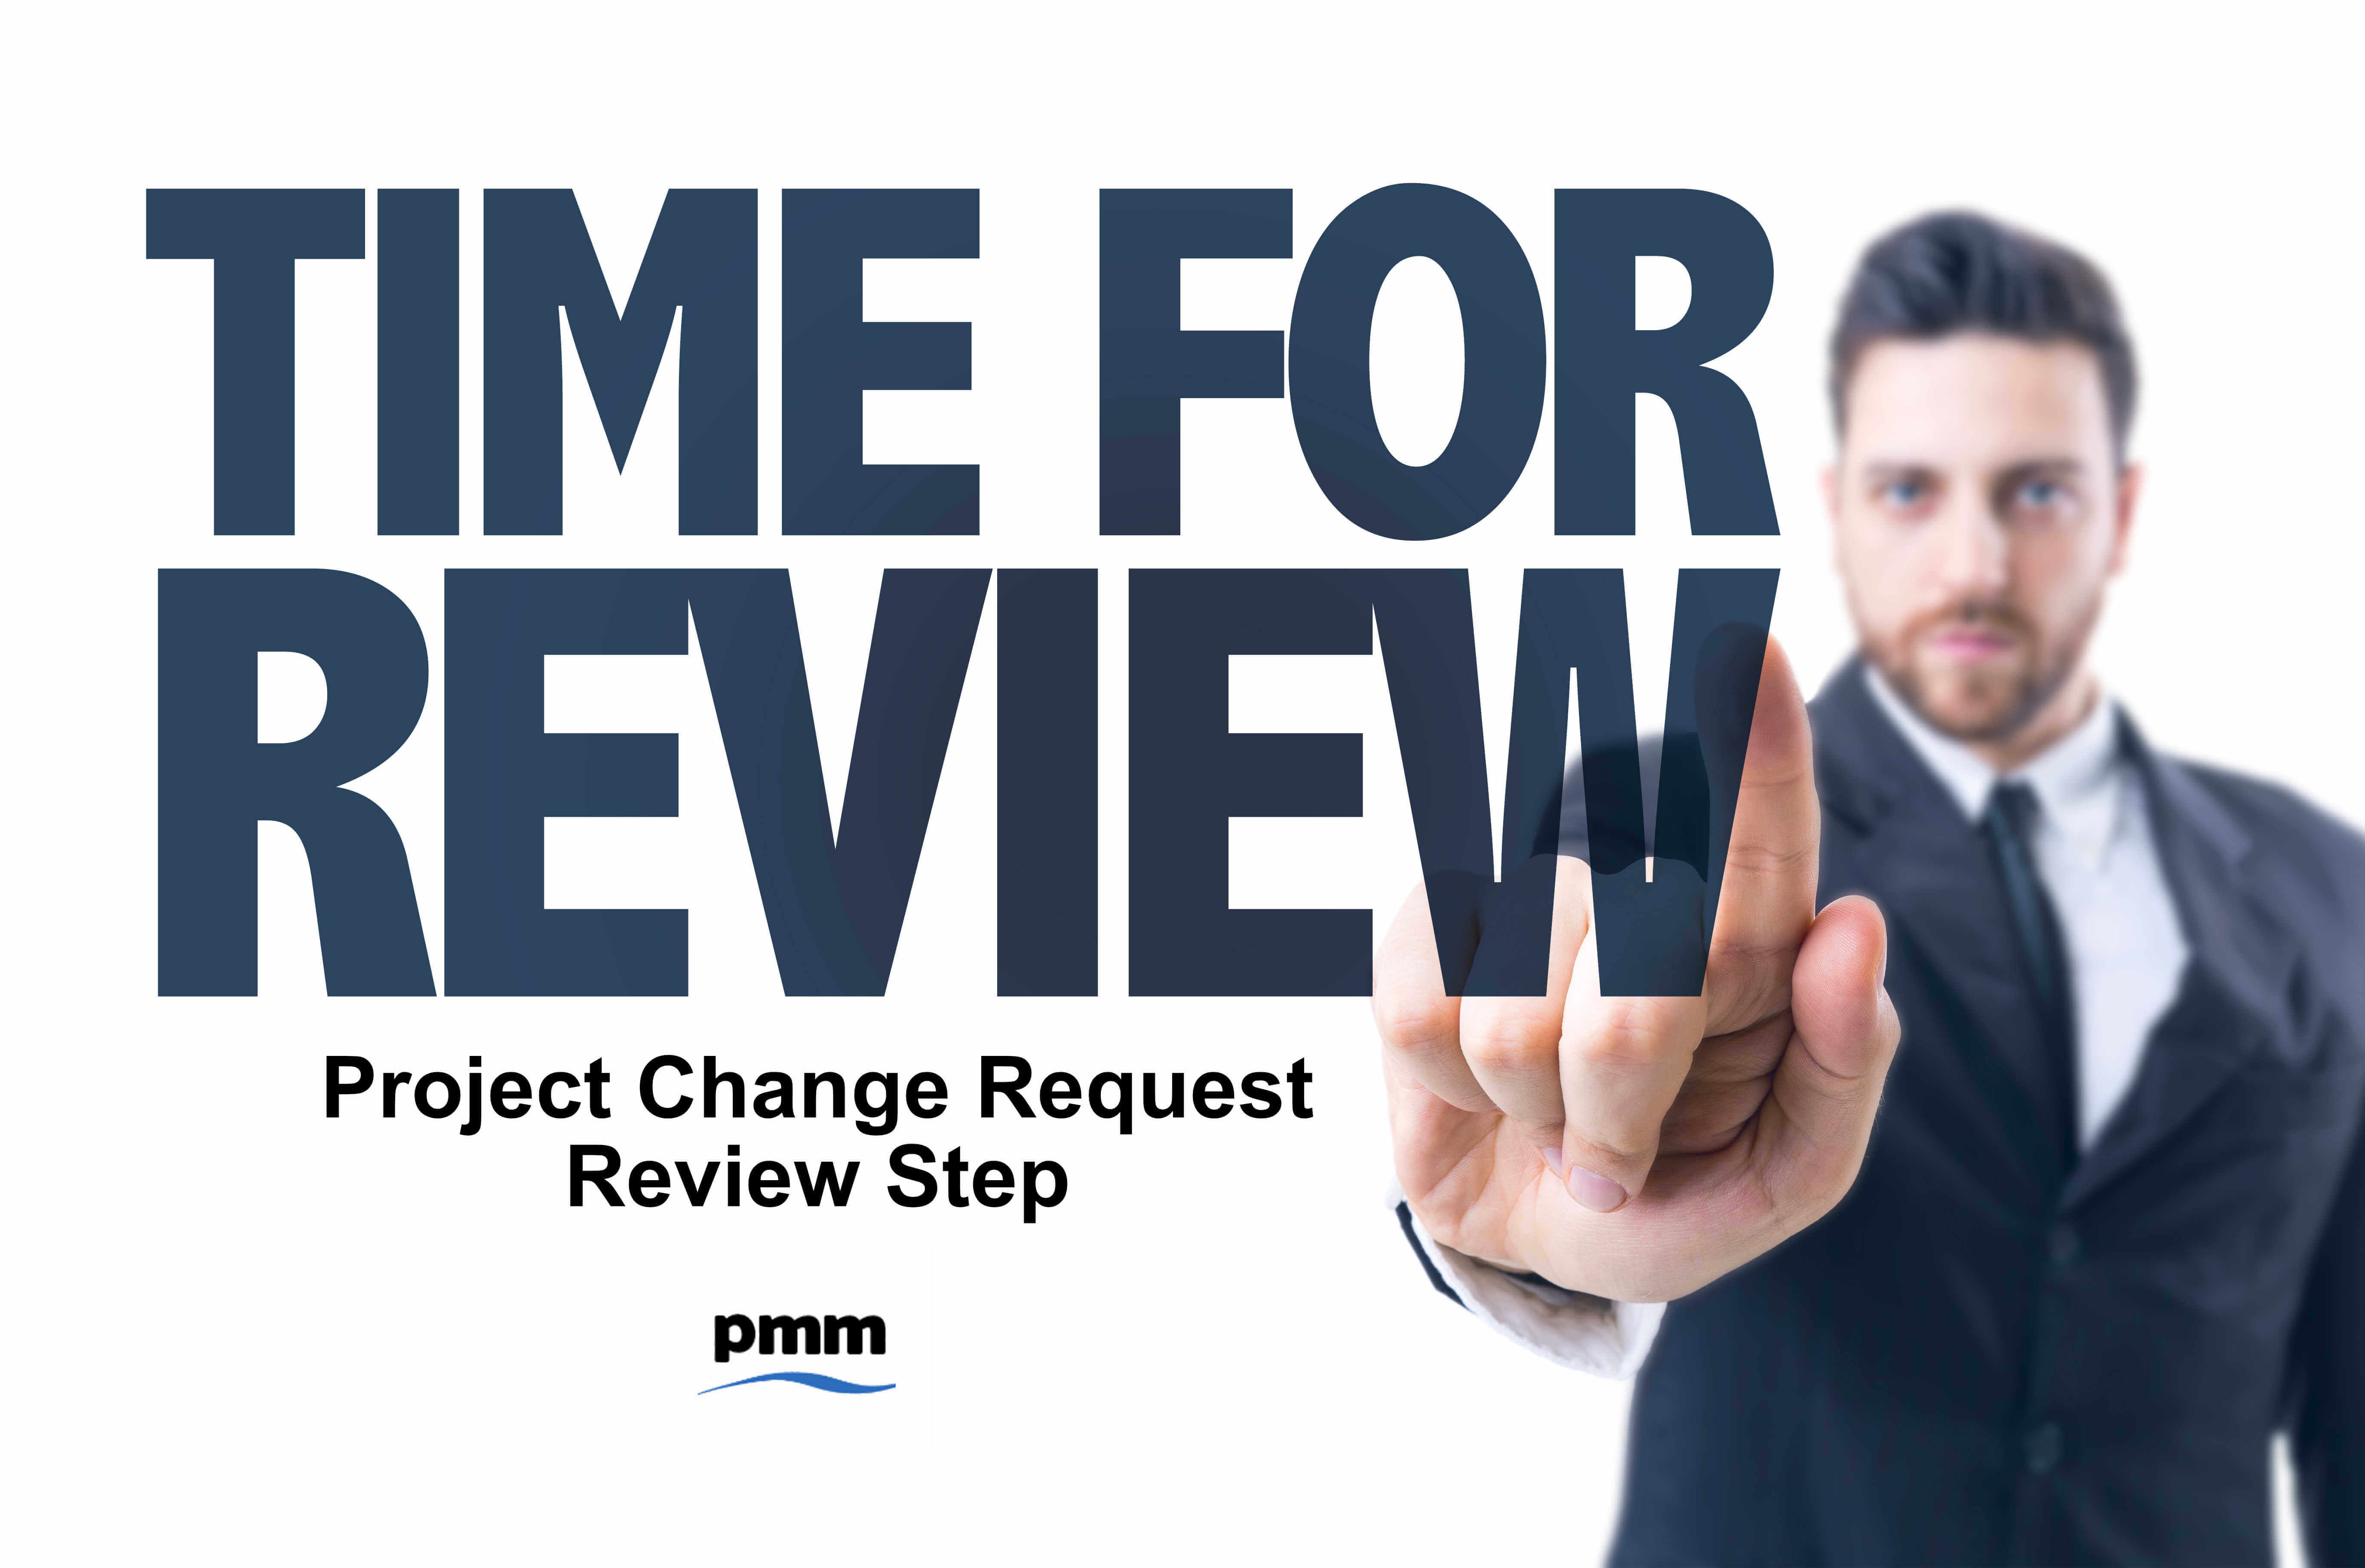 Reviewing project change requests